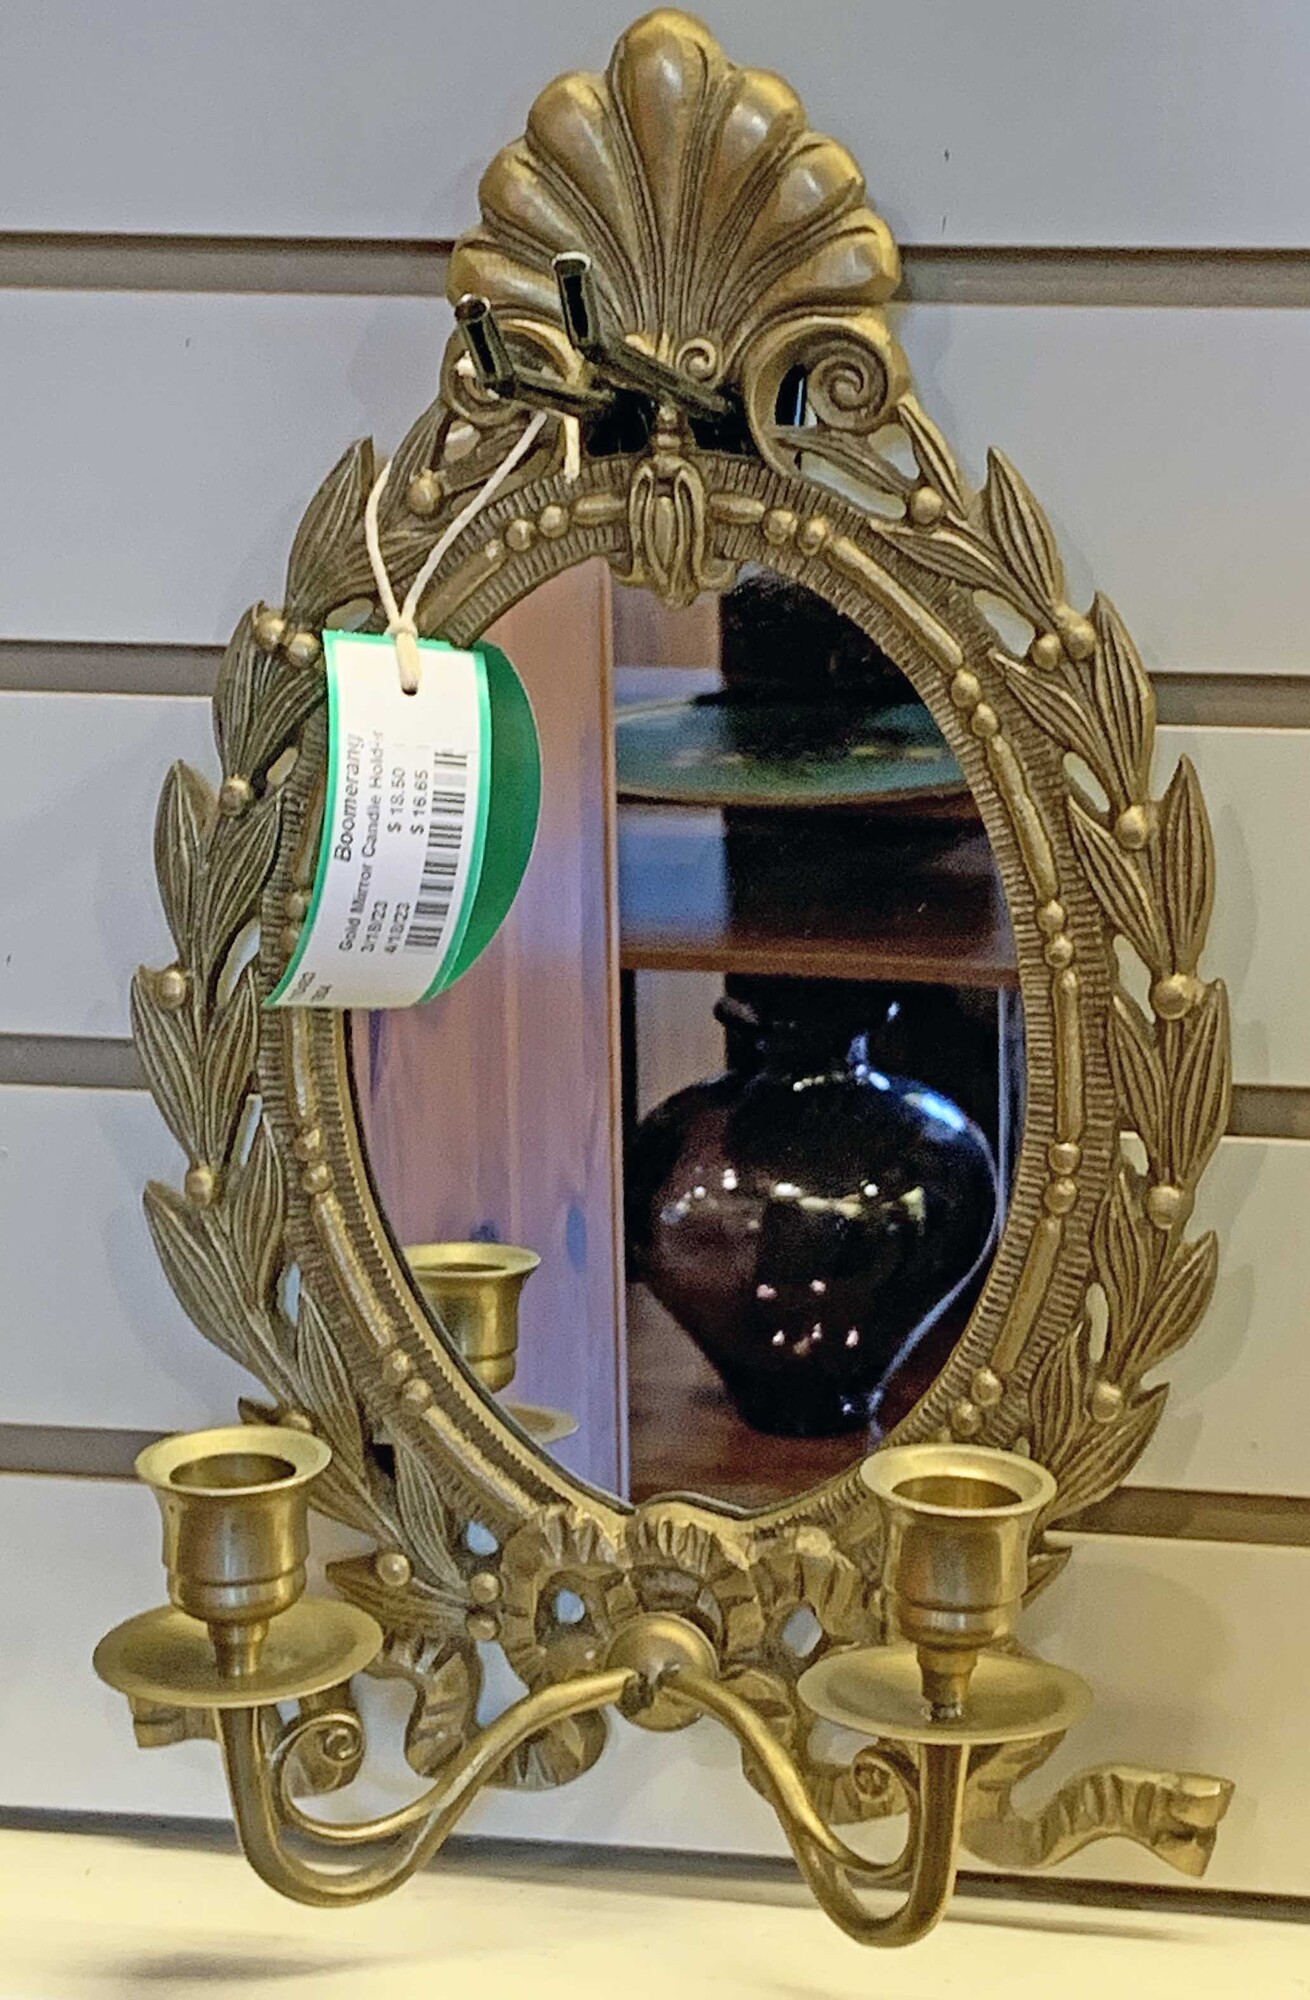 Gold Mirror Candle Holder

Size: 8w x 14h x 3.5d